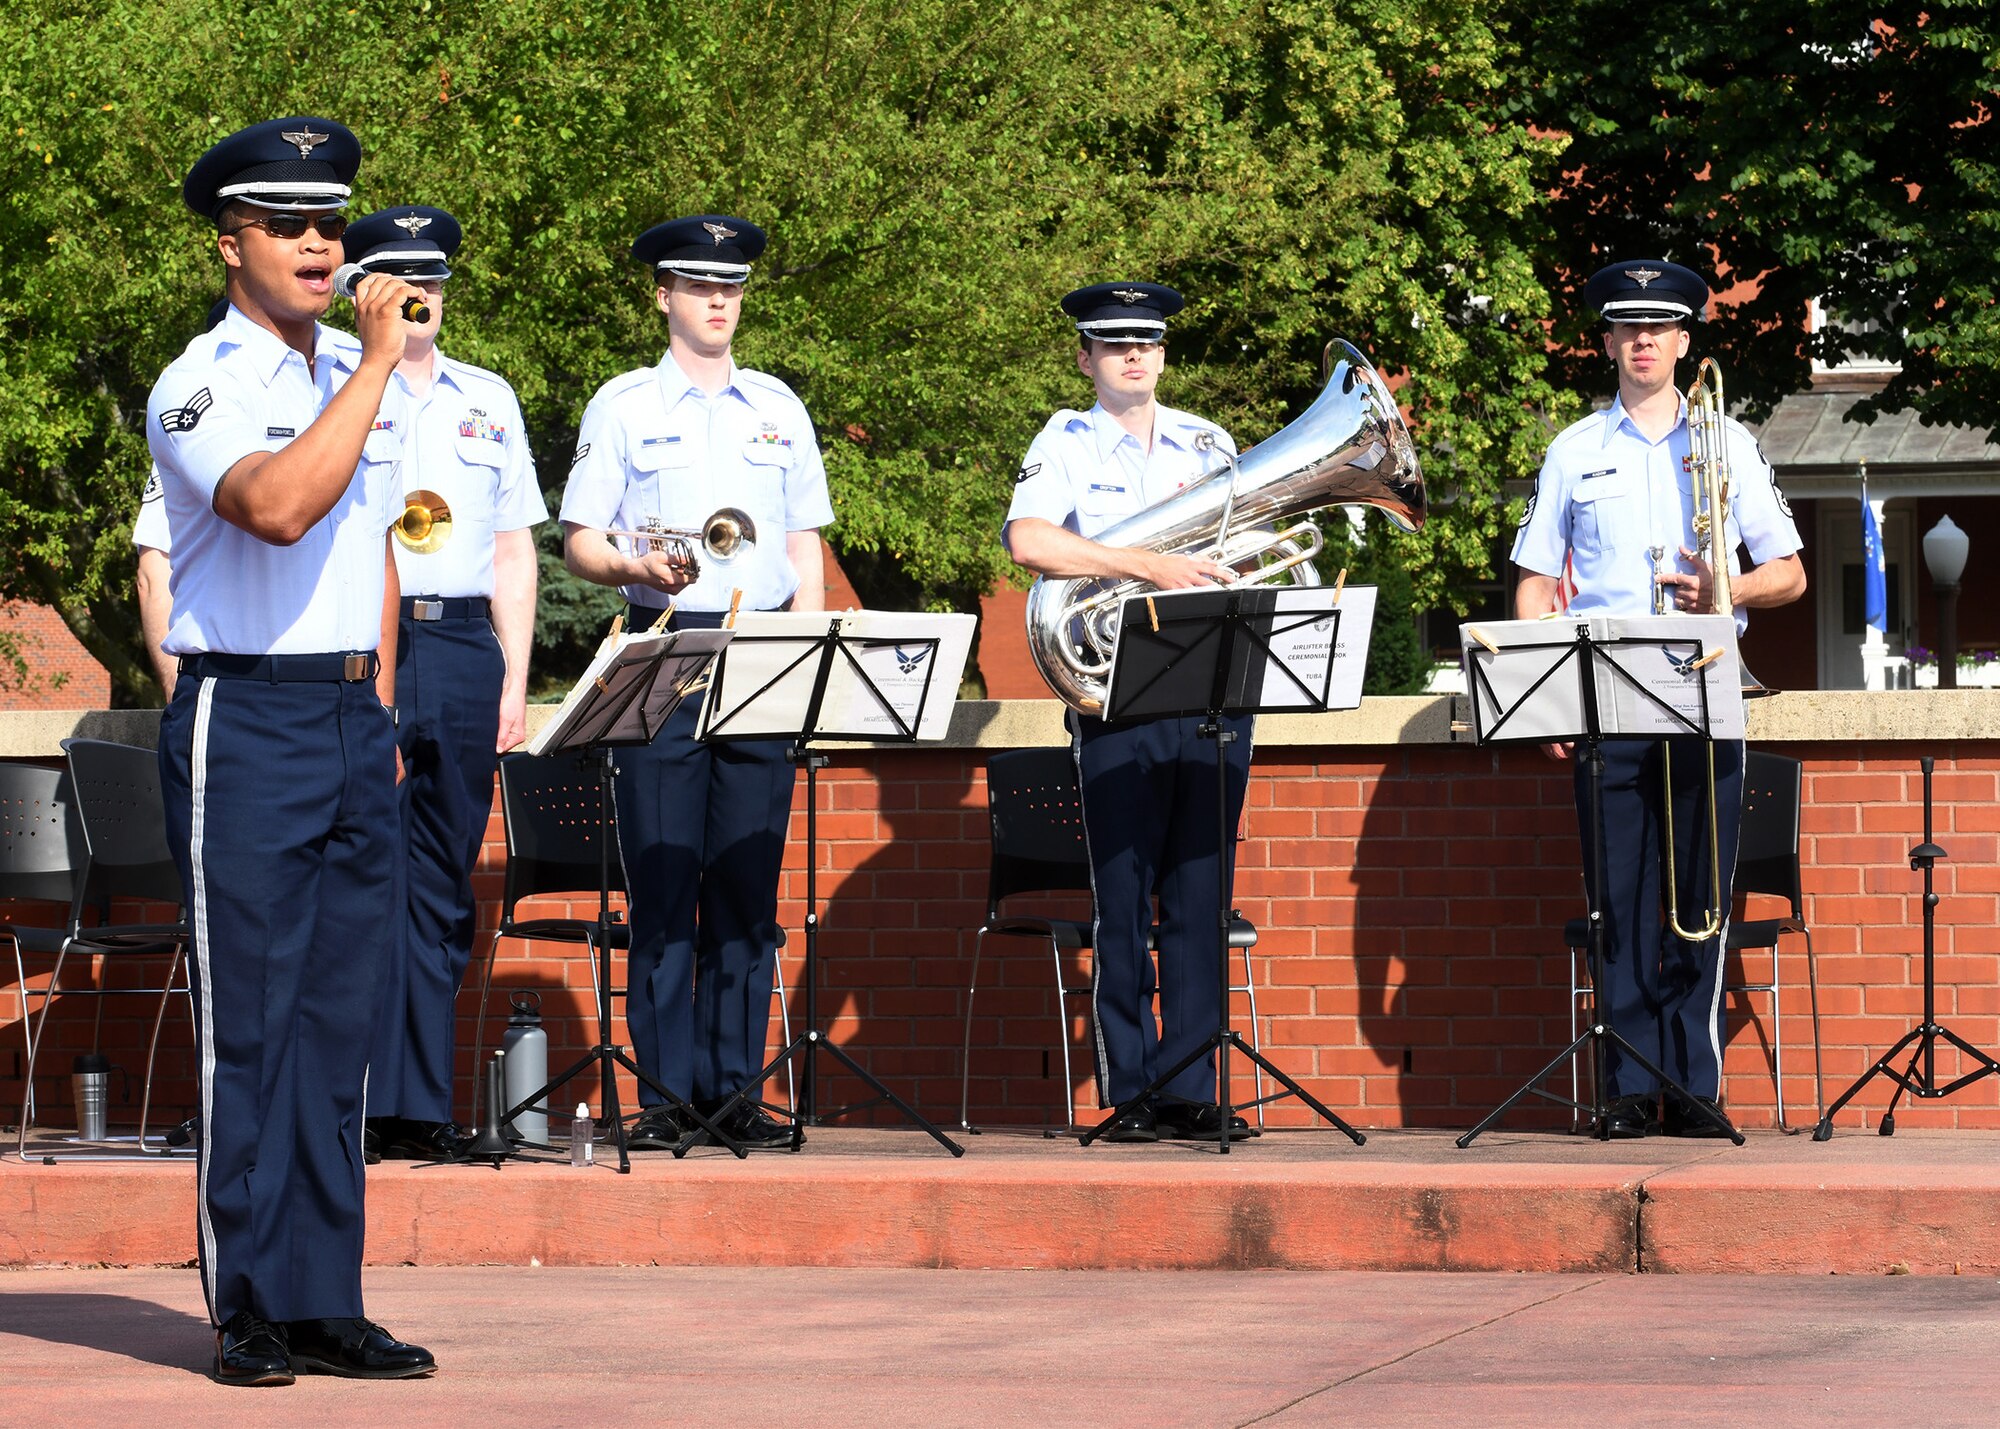 airmen in uniform in the background holding different musical instruments and in the forefront airman holding a microphone and singing